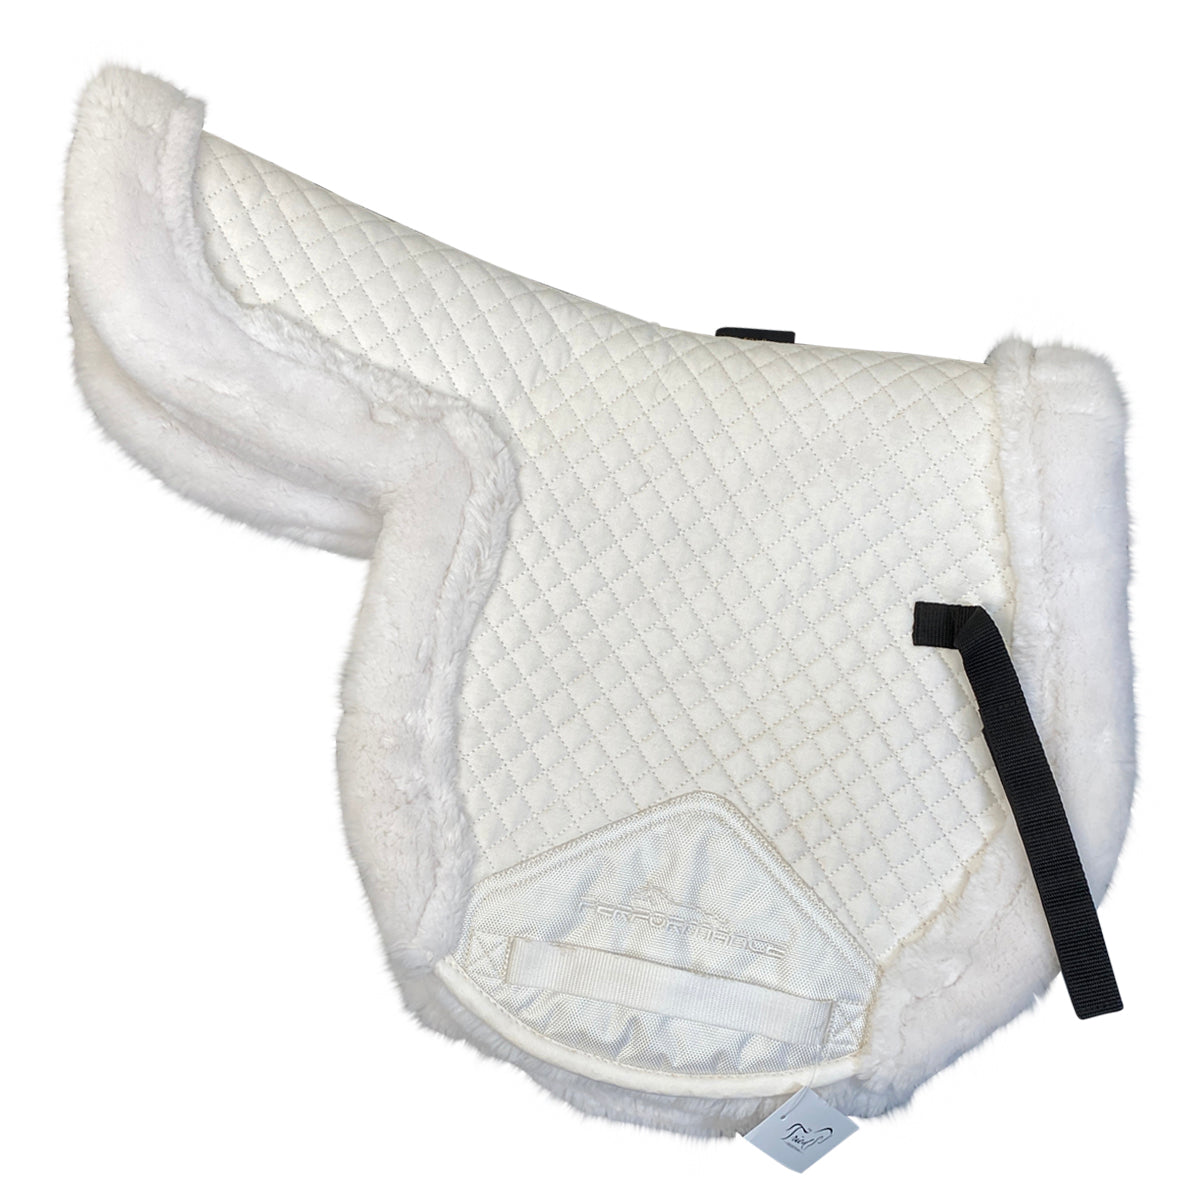 Shires Performance 'Supafleece' Saddle Pad in White